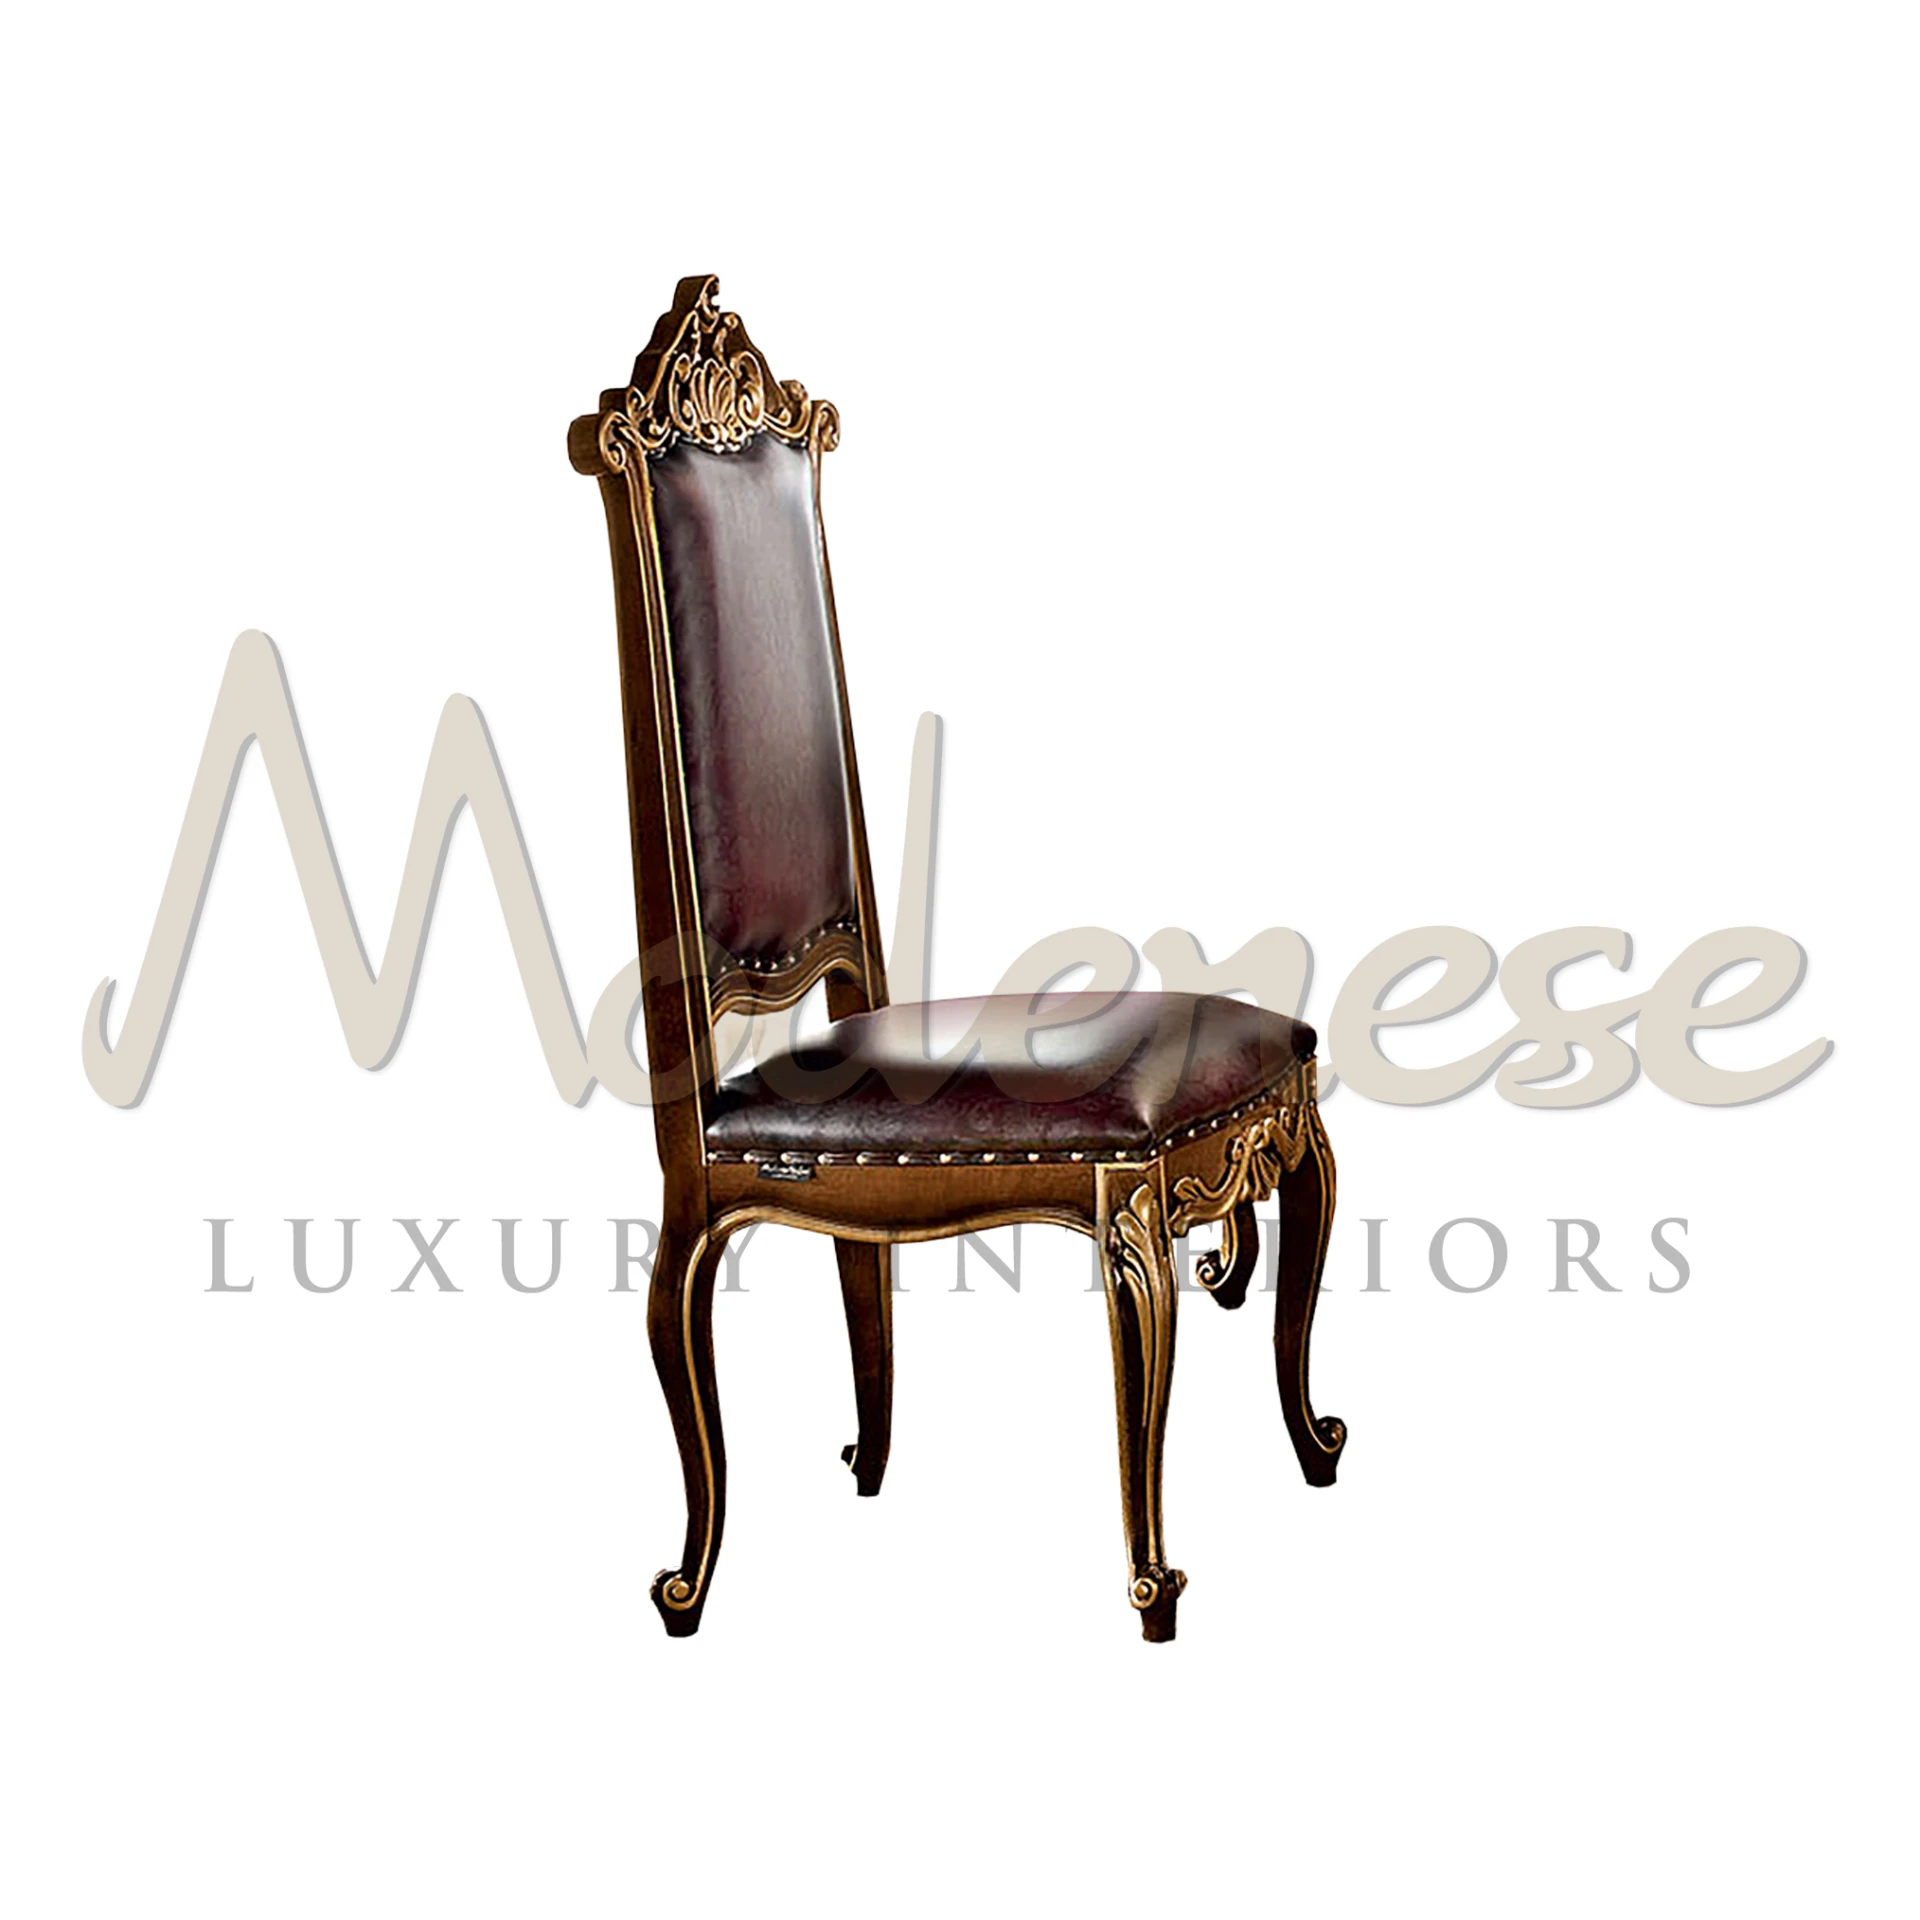 Indulge in opulence with Modenese Furniture's majestic dining chair. Featuring a walnut finish, gold leaf accents, and ivory floral upholstery.